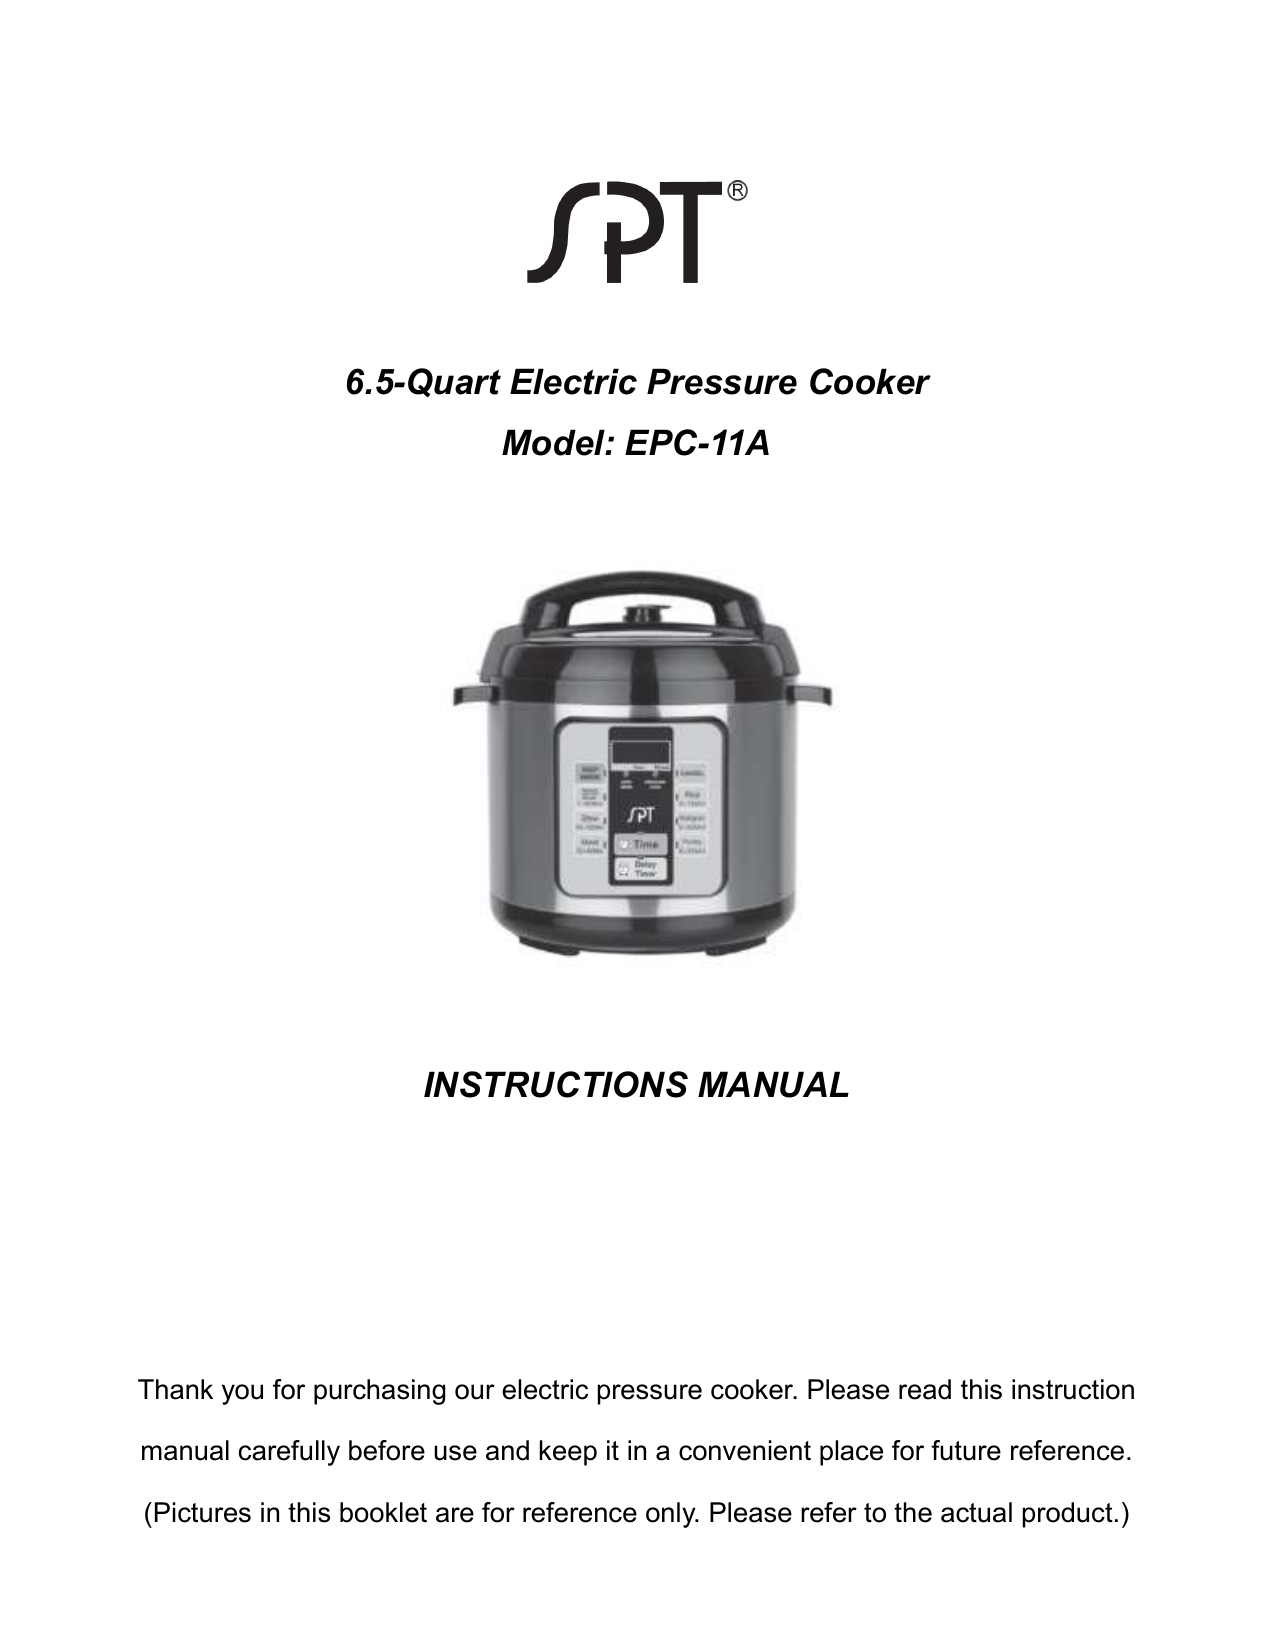 SPT EPC-13C 6.5 Qt Electric Stainless Steel Pressure Cooker with Quick Release Quart